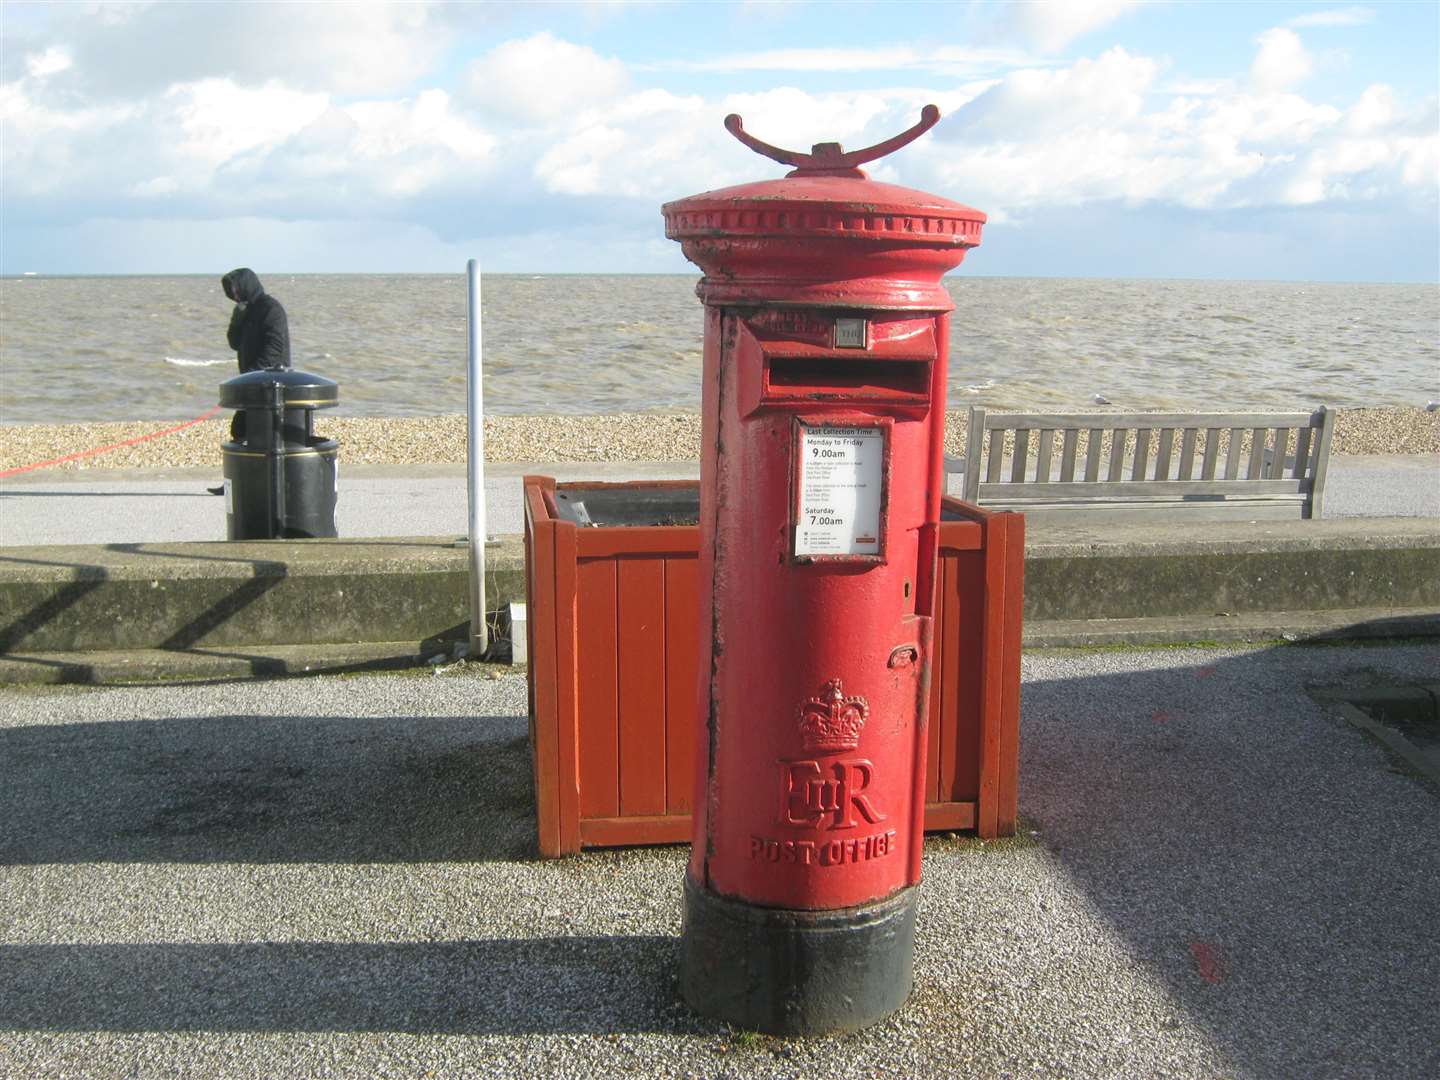 Jenny Domane is dissatisfied with the state of the letter boxes in Deal